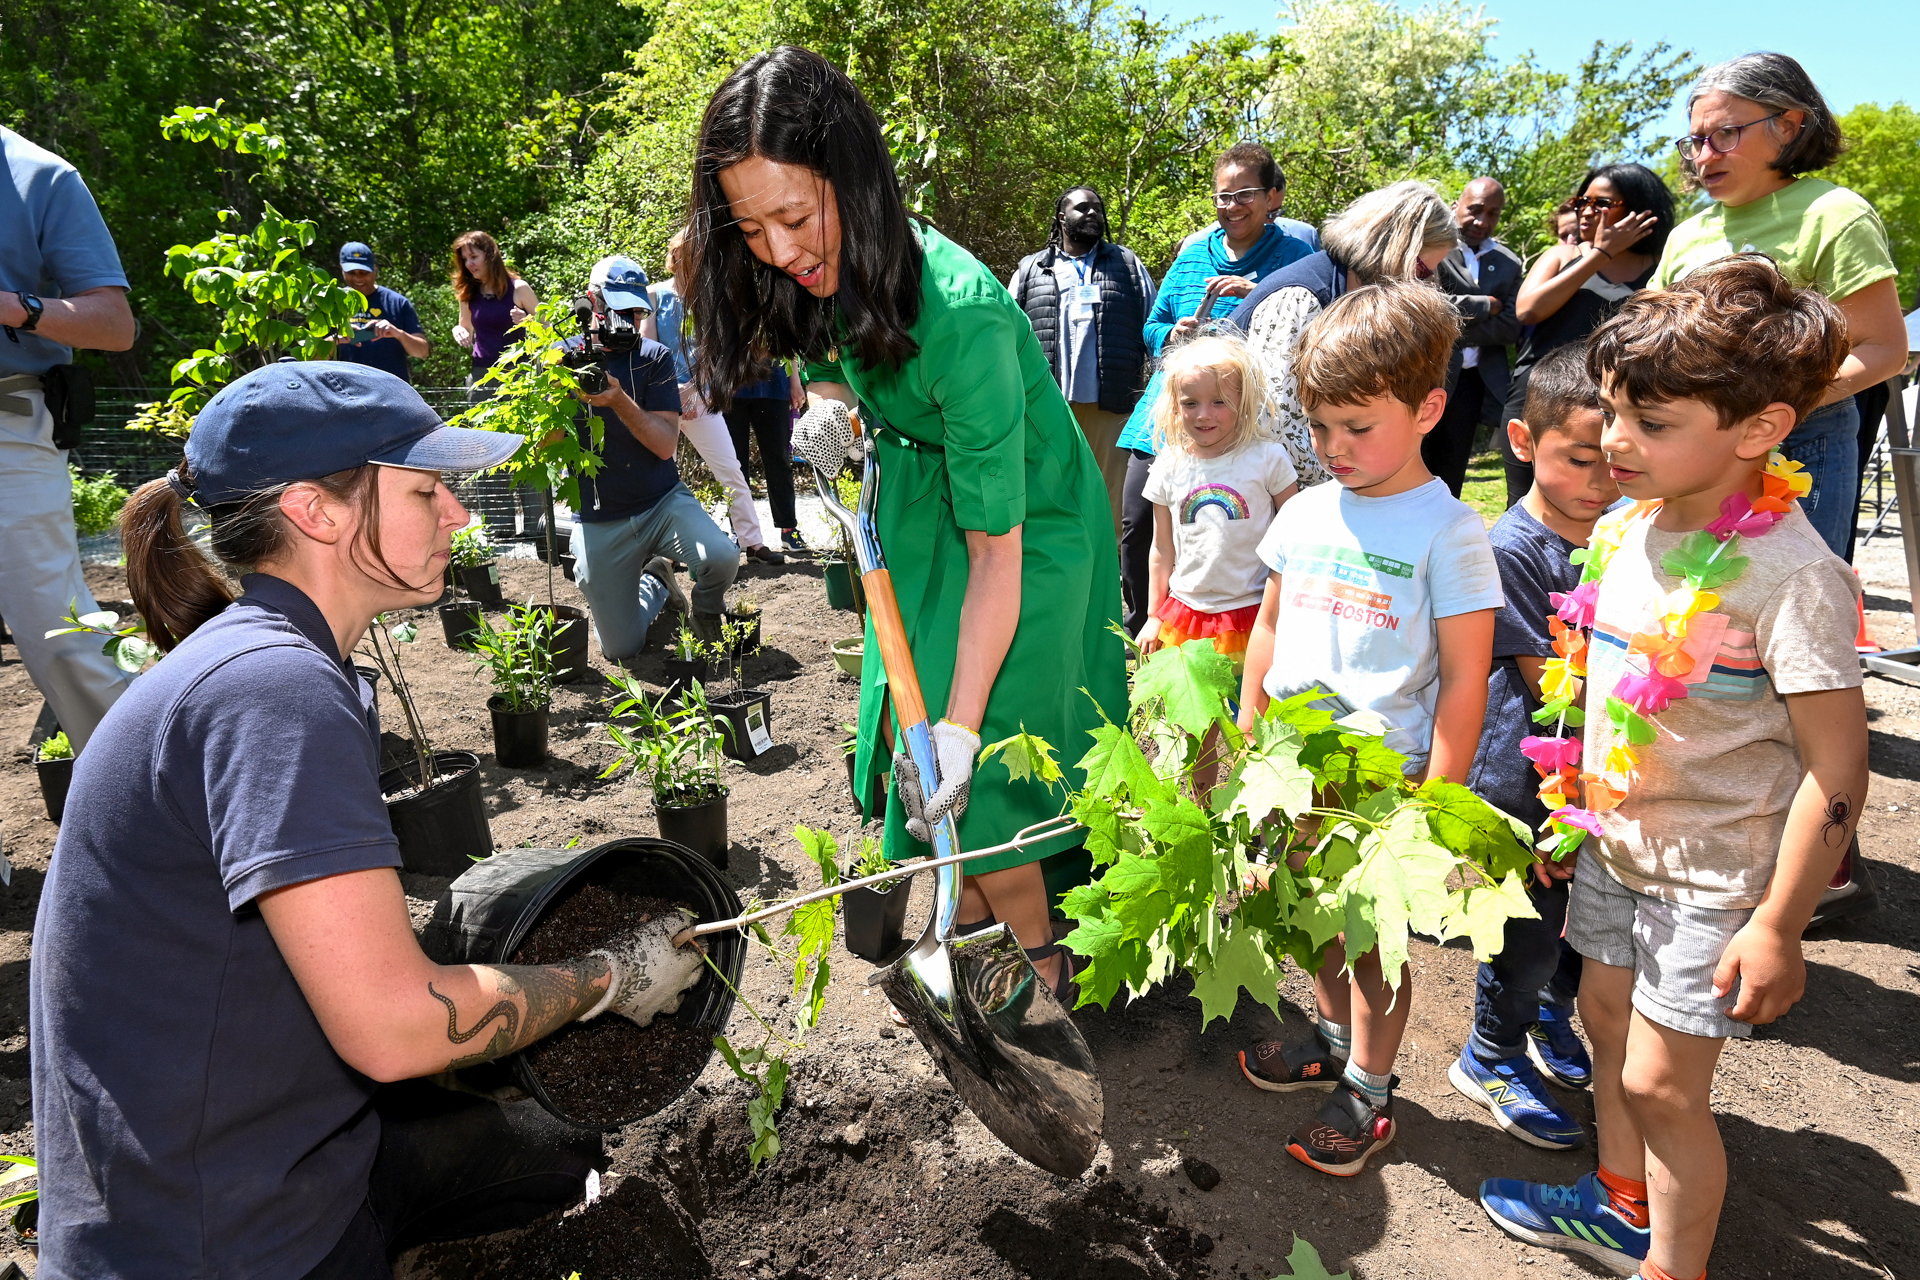 Boston Mayor Michelle Wu using a shovel to plant a young maple sapling while young children look on at the Boston Nature Center tree planting ceremony to celebrate the launch of the Boston Tree Alliance in May 2023